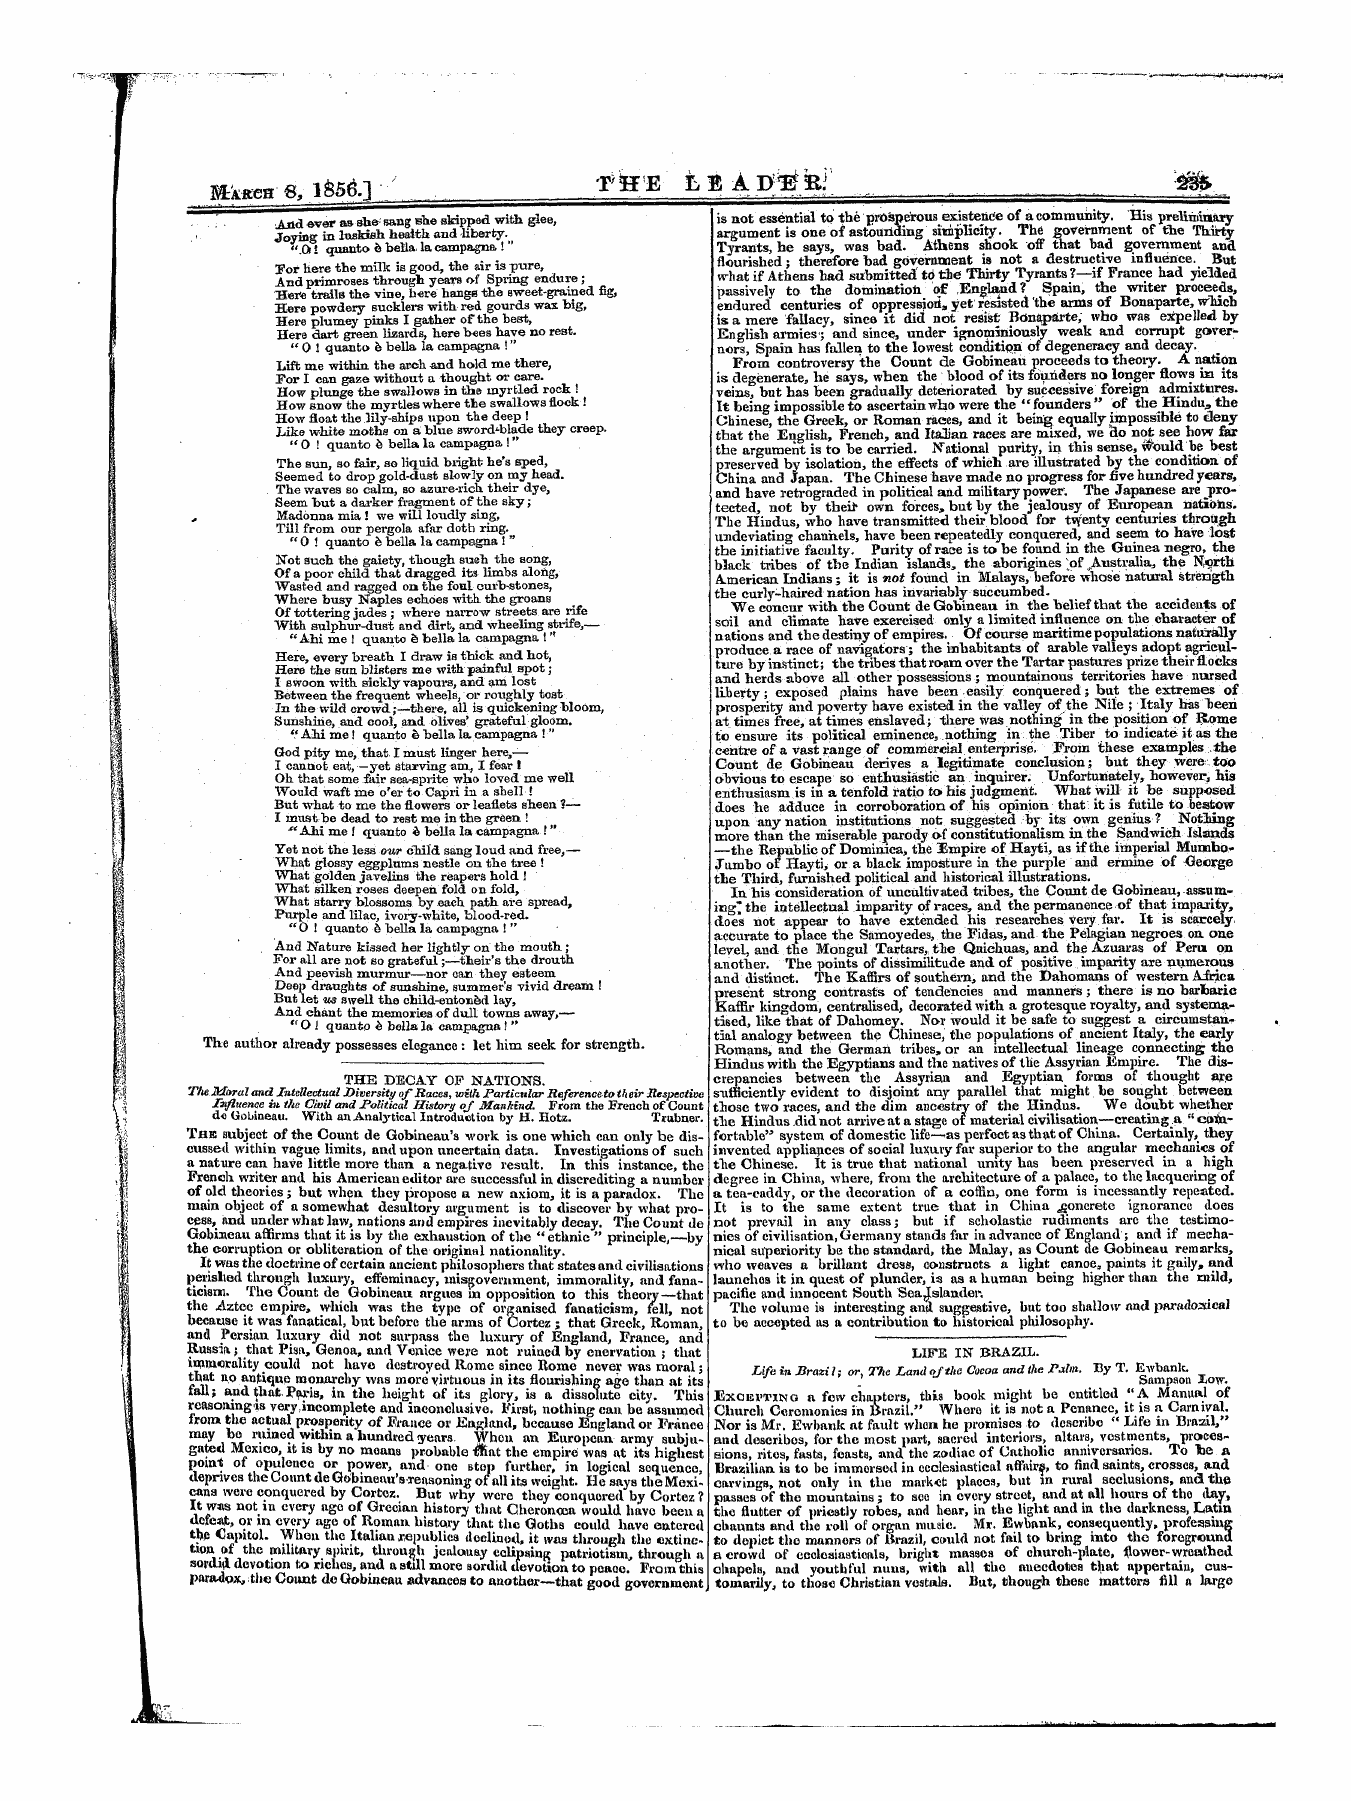 Leader (1850-1860): jS F Y, 1st edition: 19